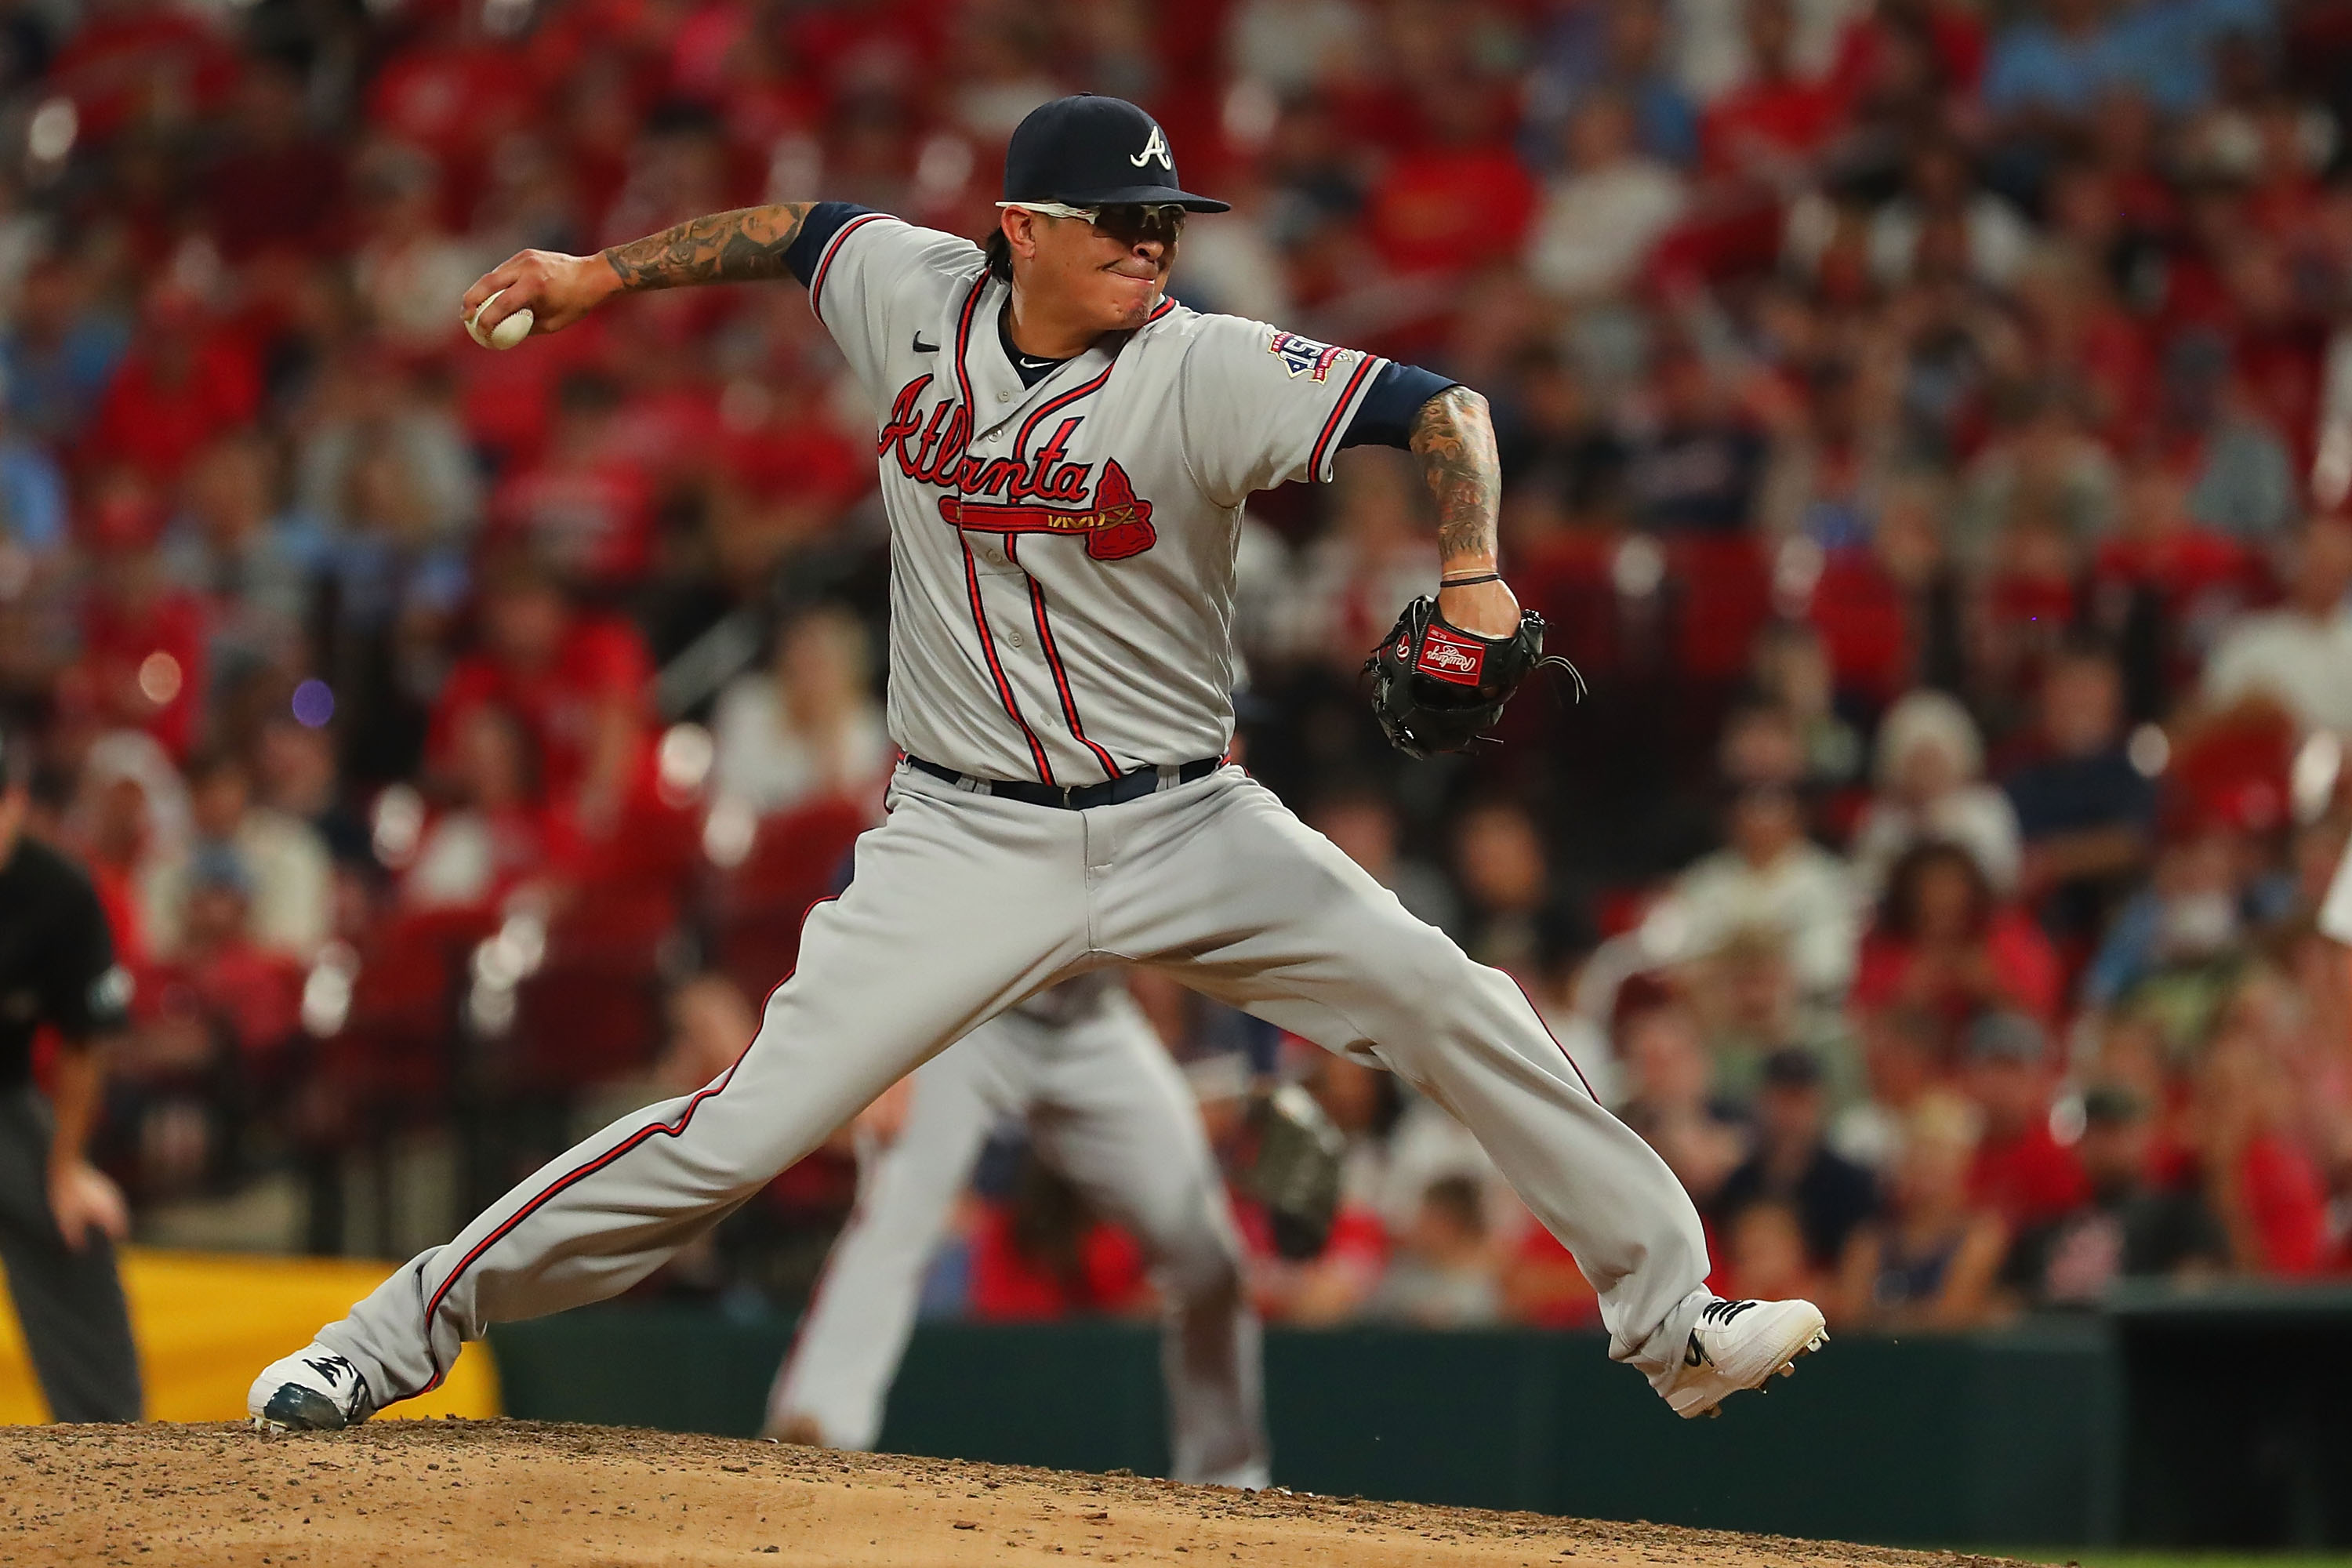 Jesse Chavez - MLB Relief pitcher - News, Stats, Bio and more